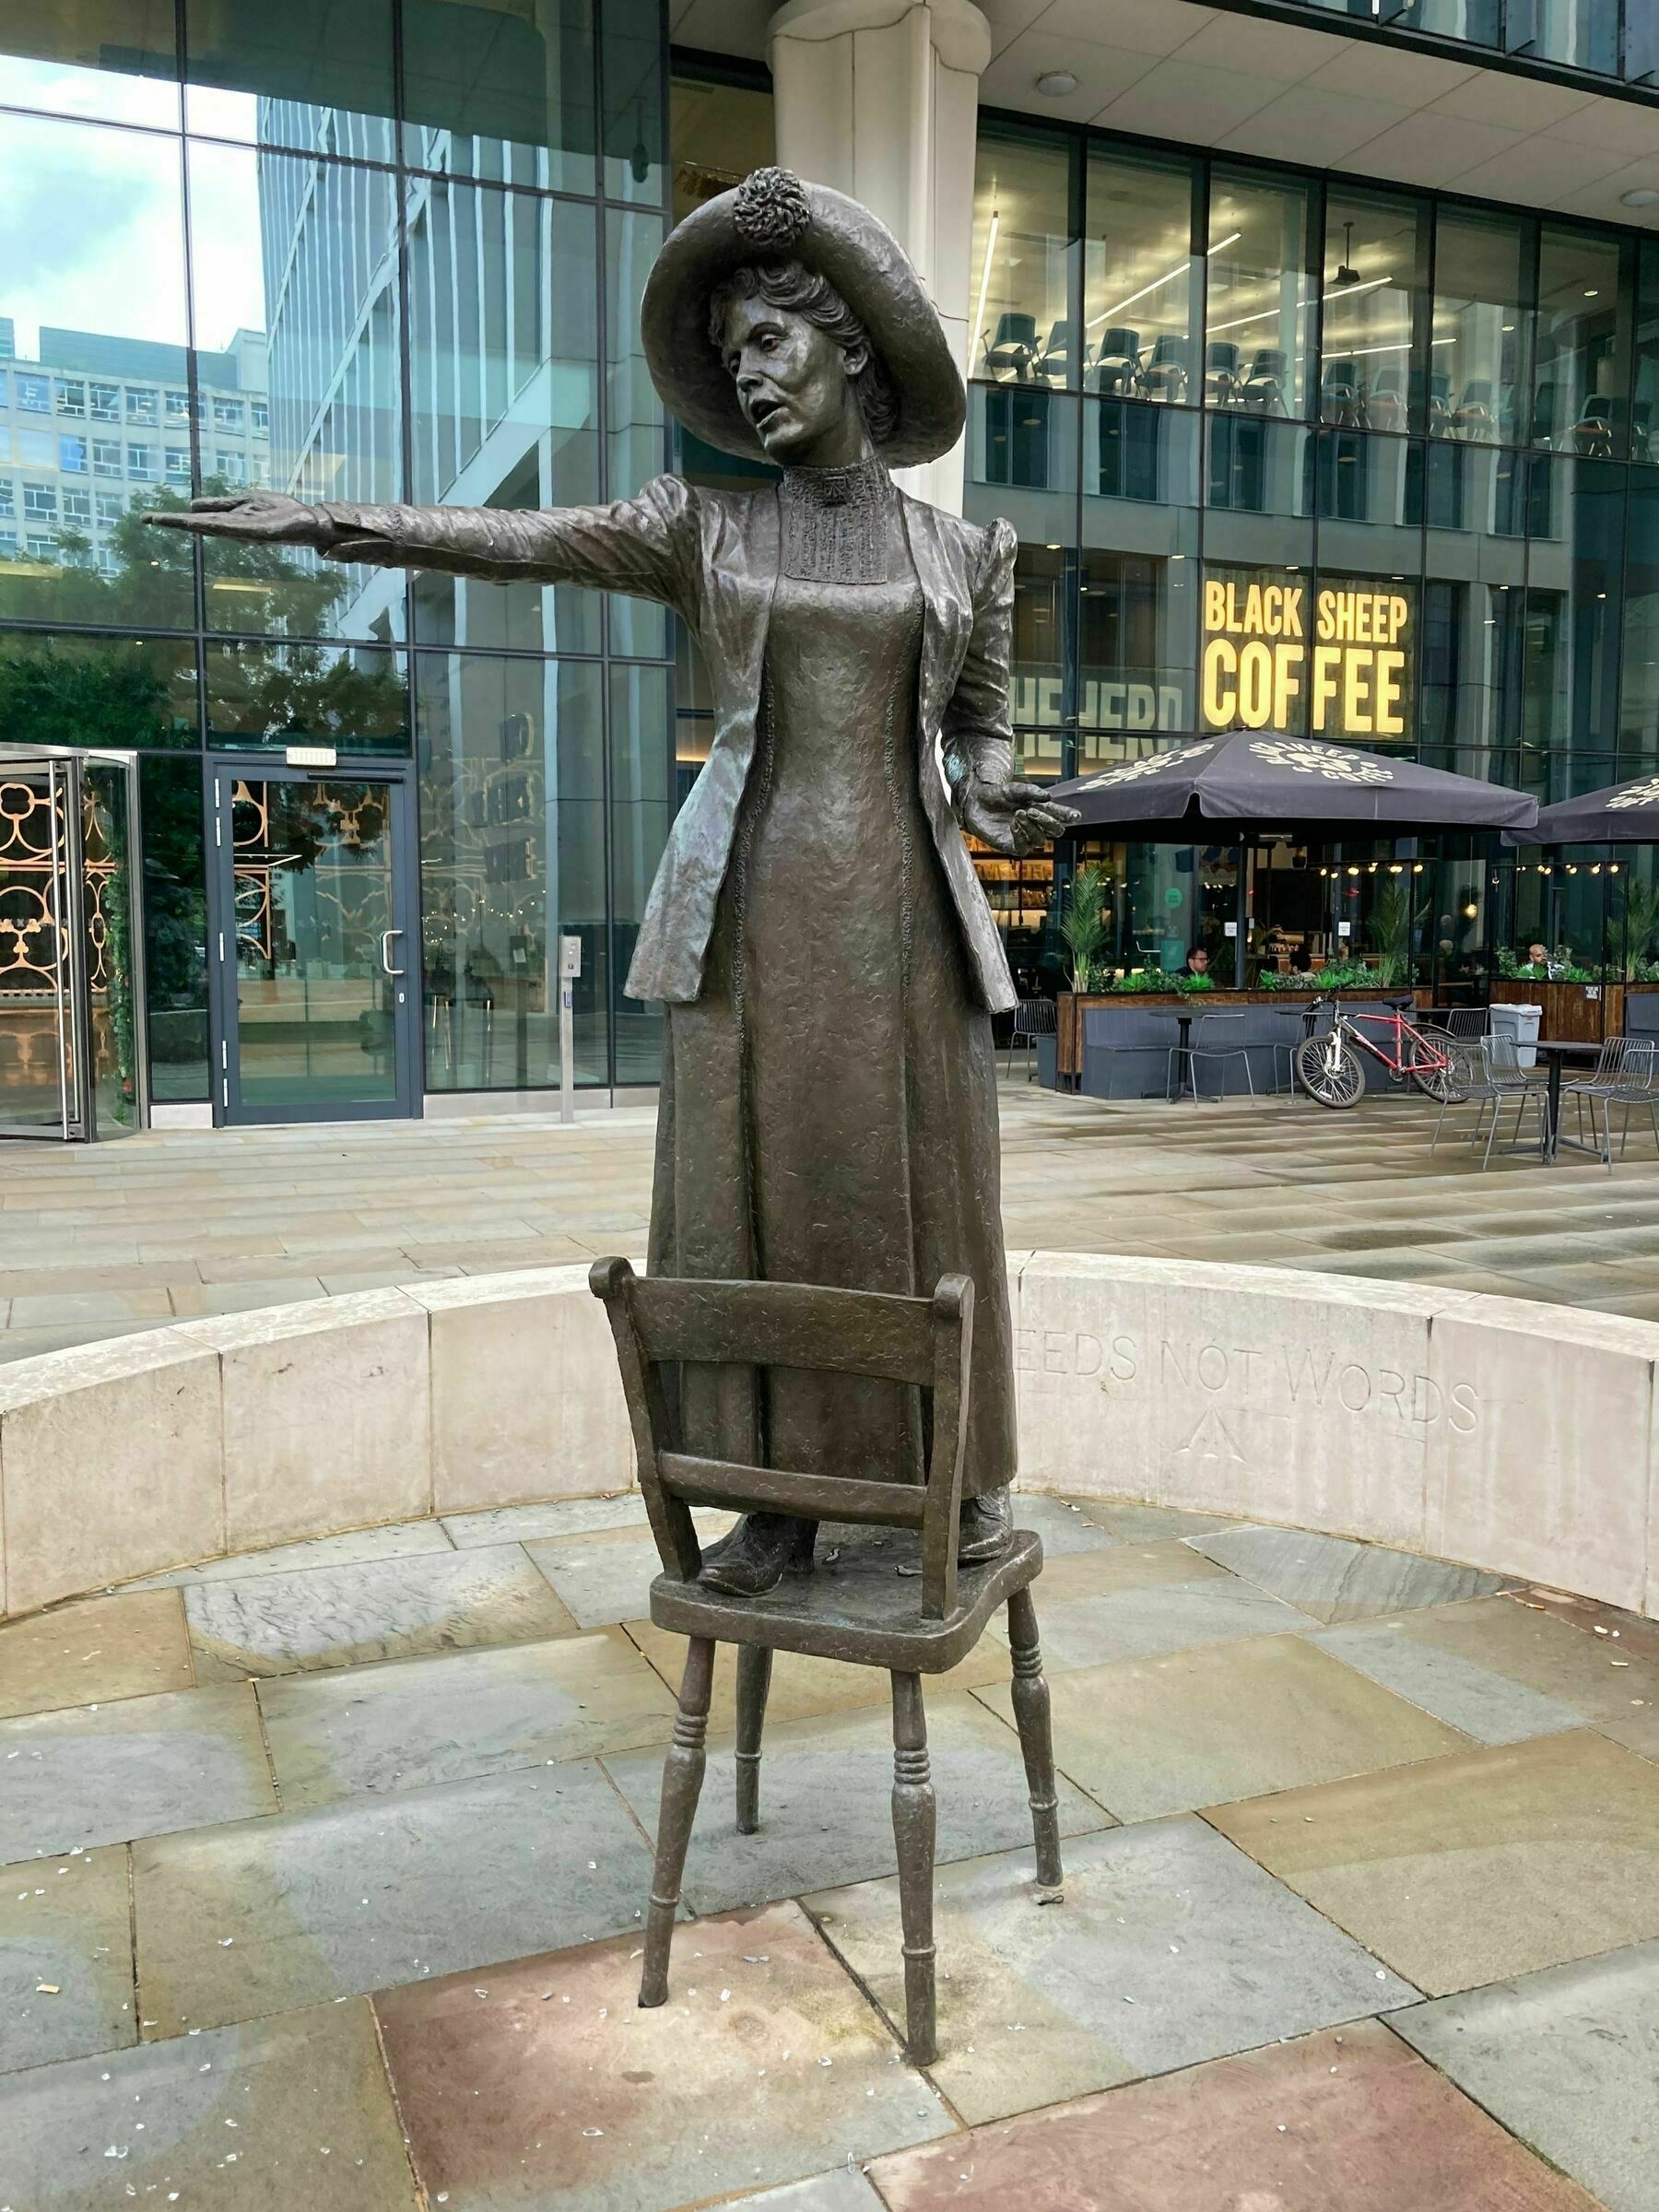 Statue of Emmeline Pankhurst giving a speech from a chair in Manchester UK